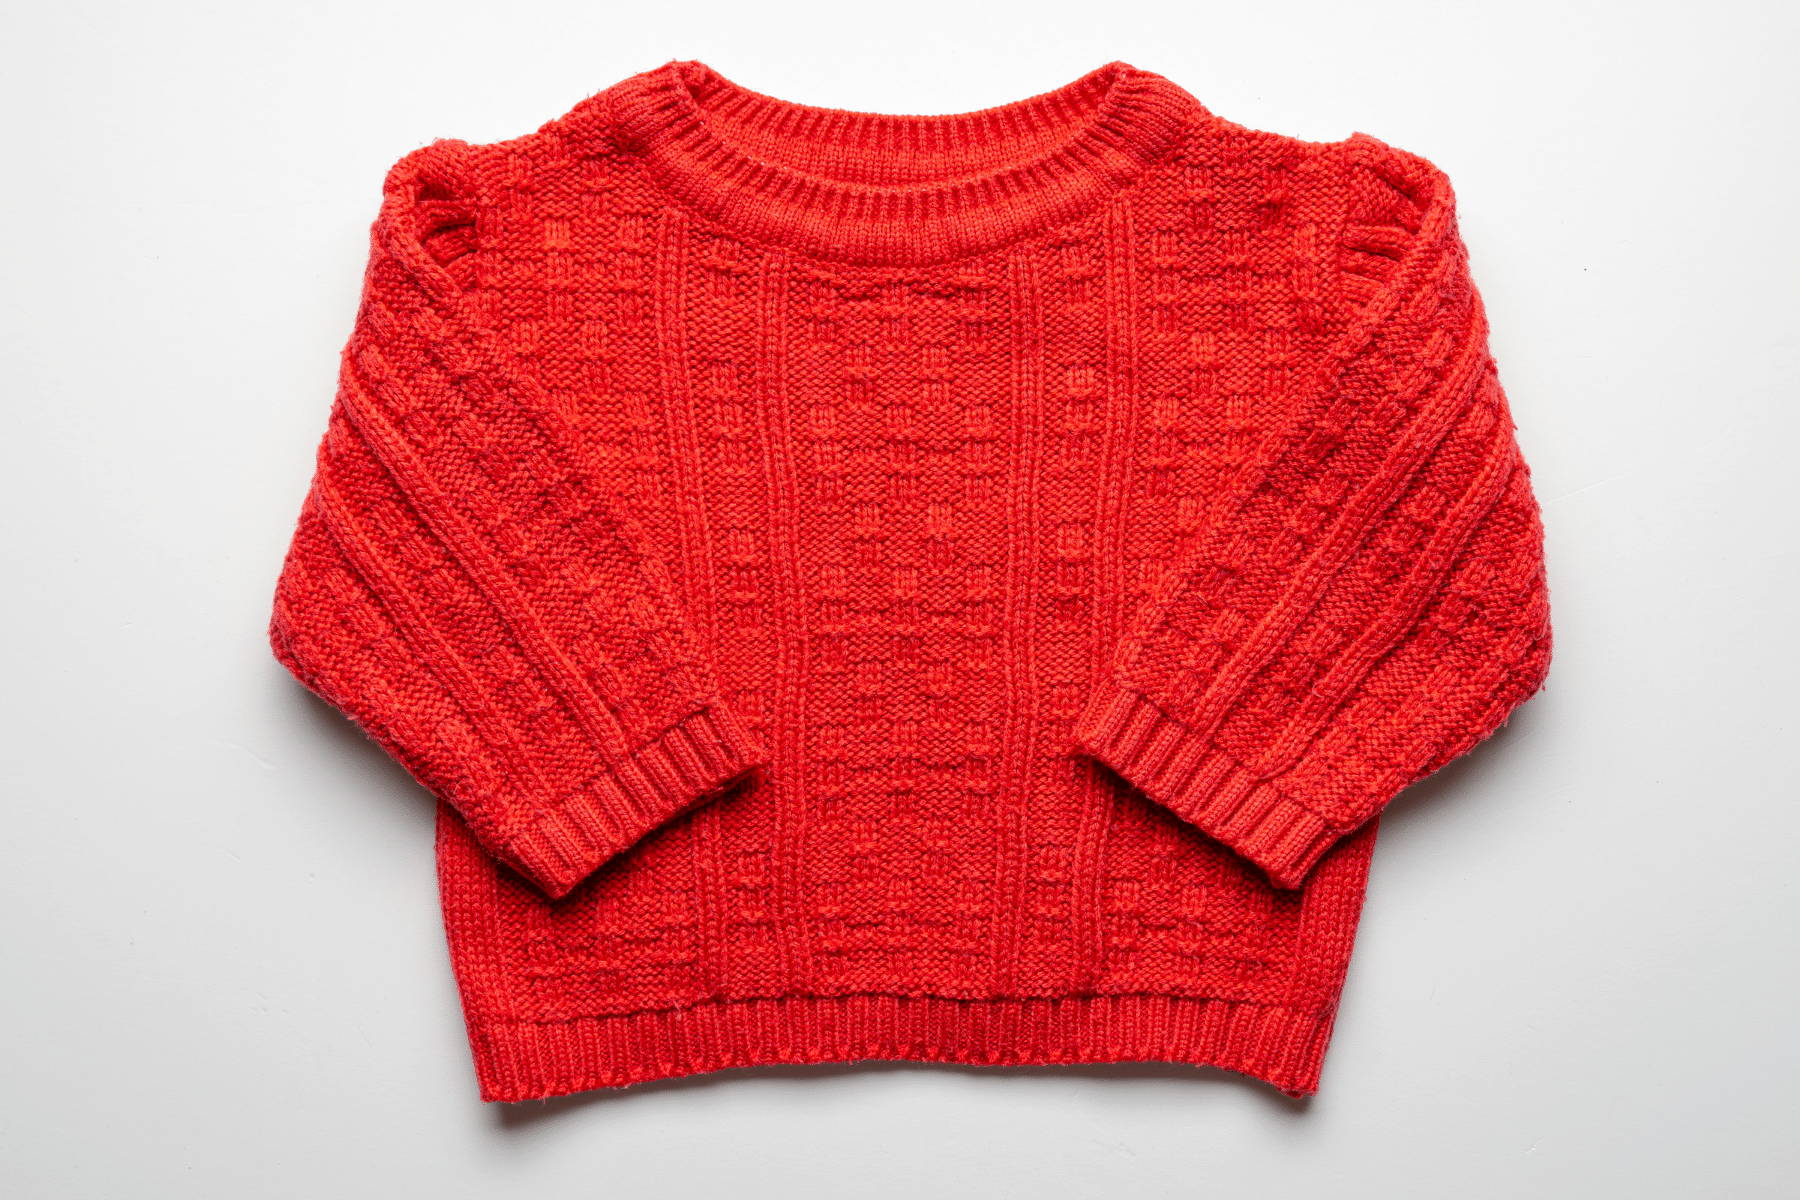 Finished red sweater